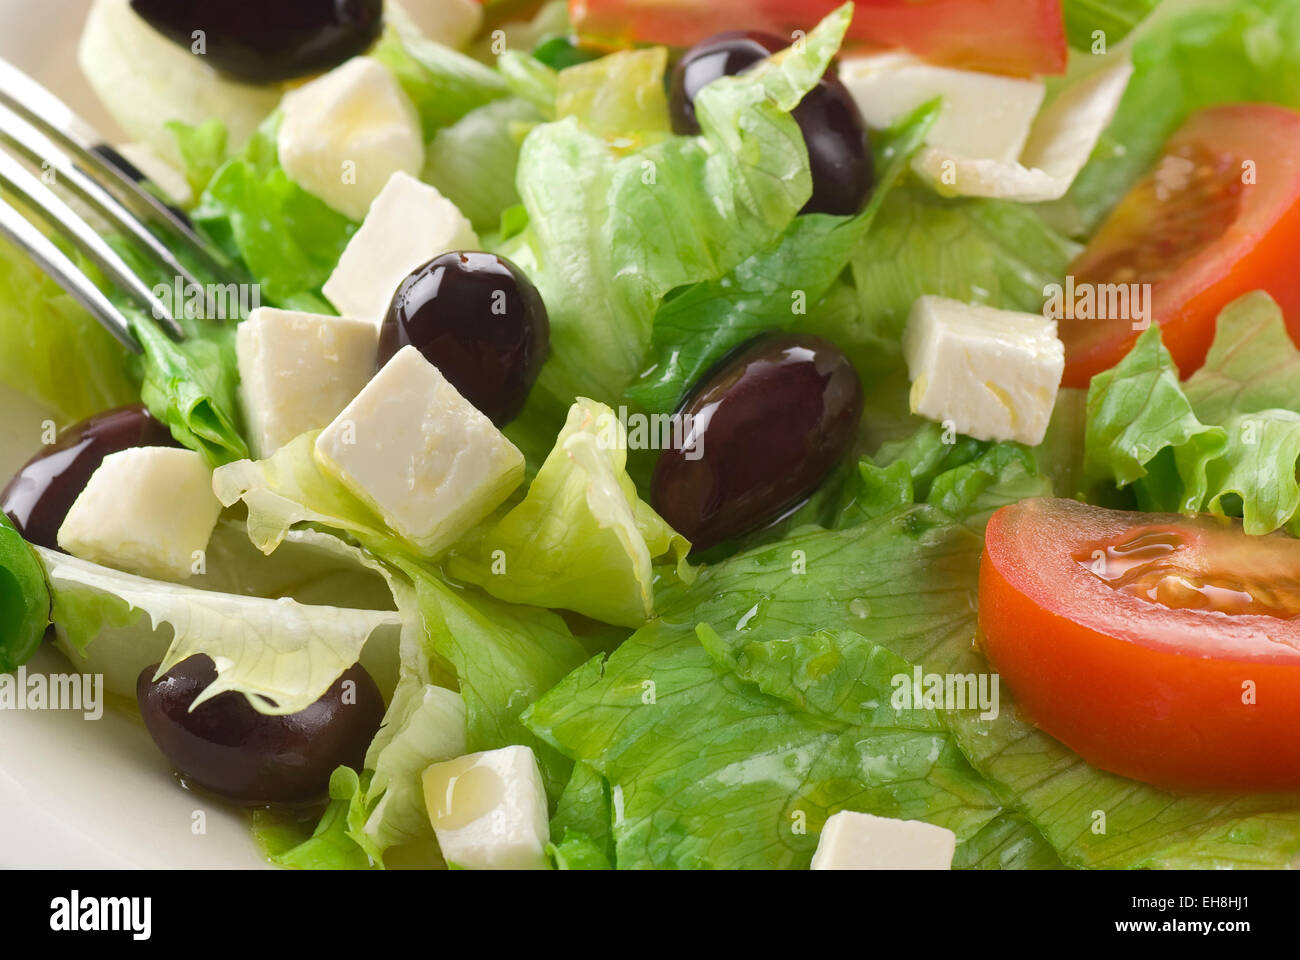 Feta cheese salad with olive oil. Stock Photo